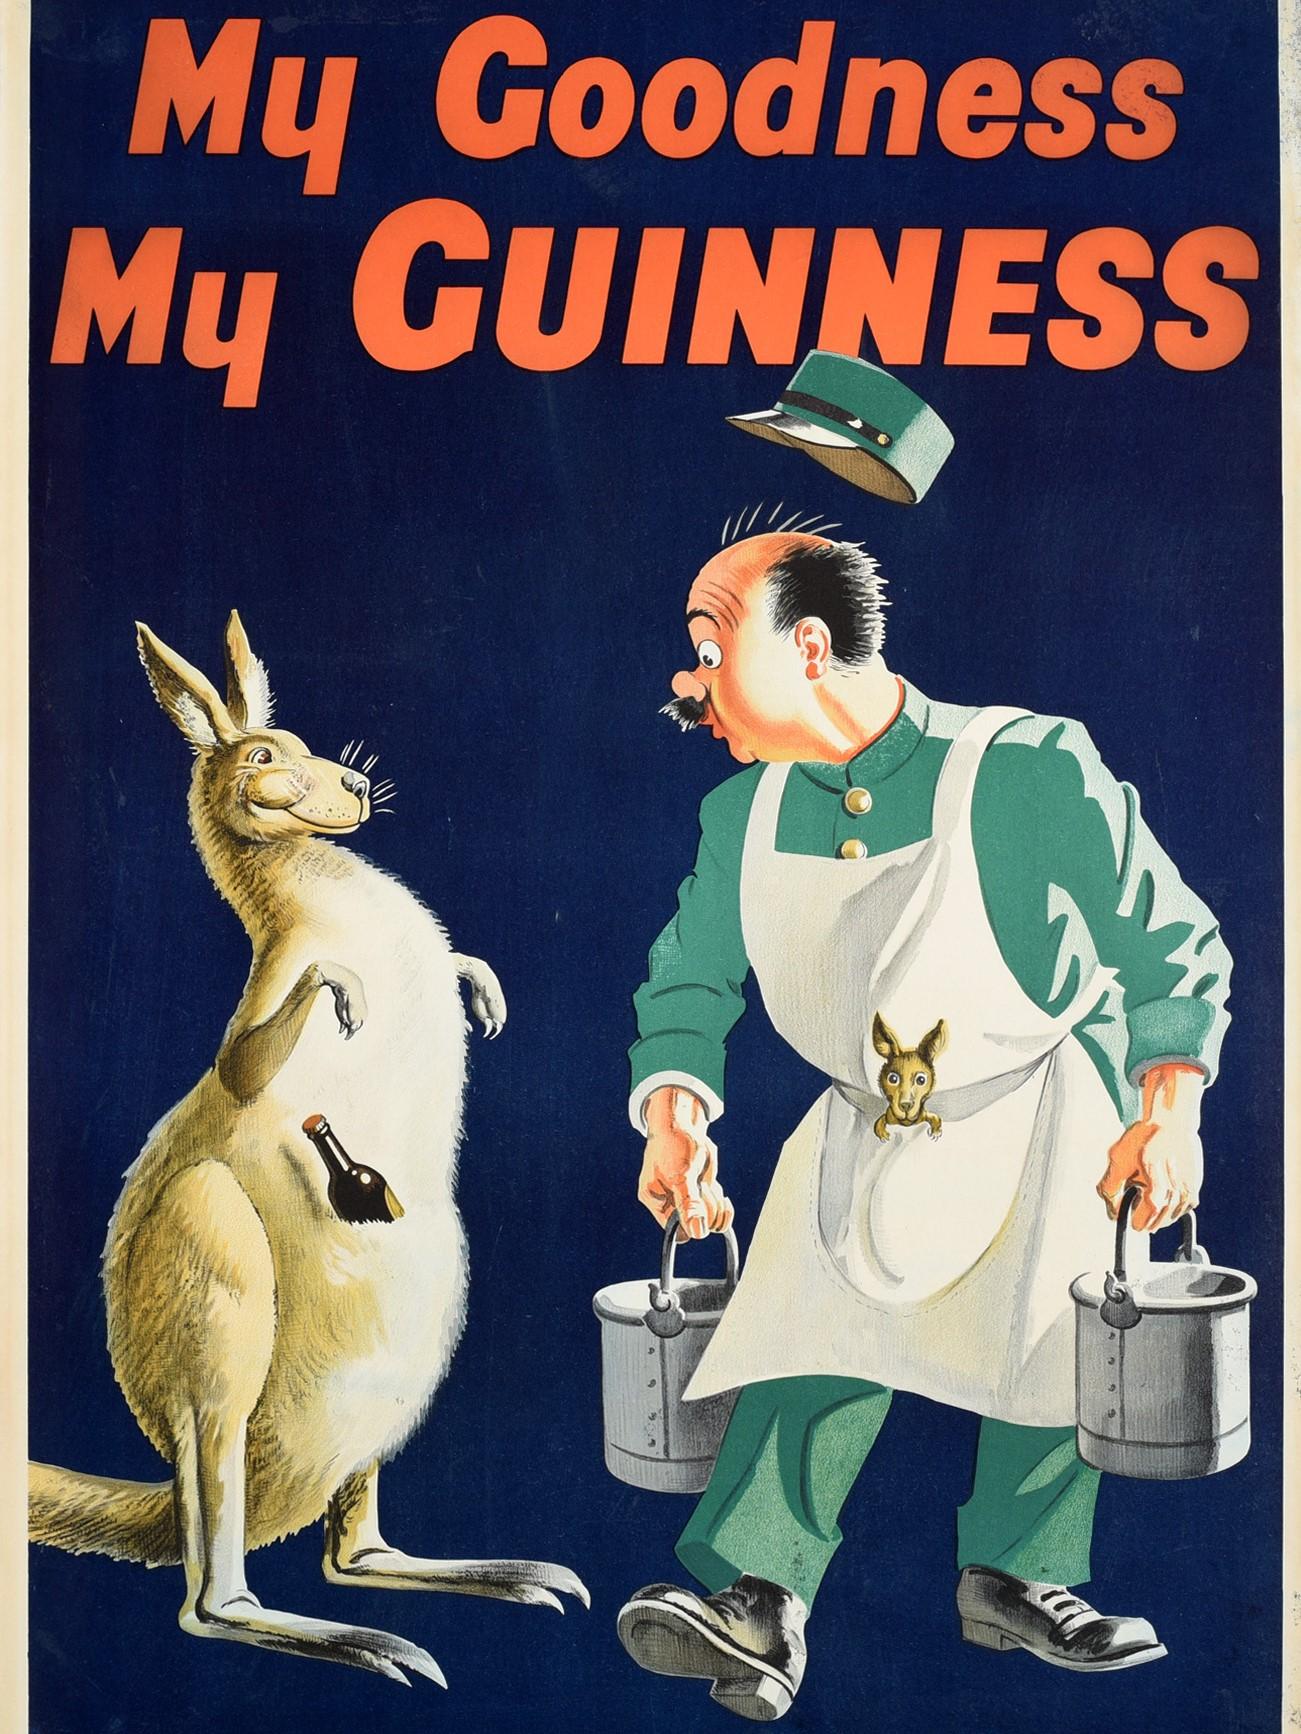 British Original Vintage Drink Poster My Goodness My Guinness Kangaroo Beer Bottle Pouch